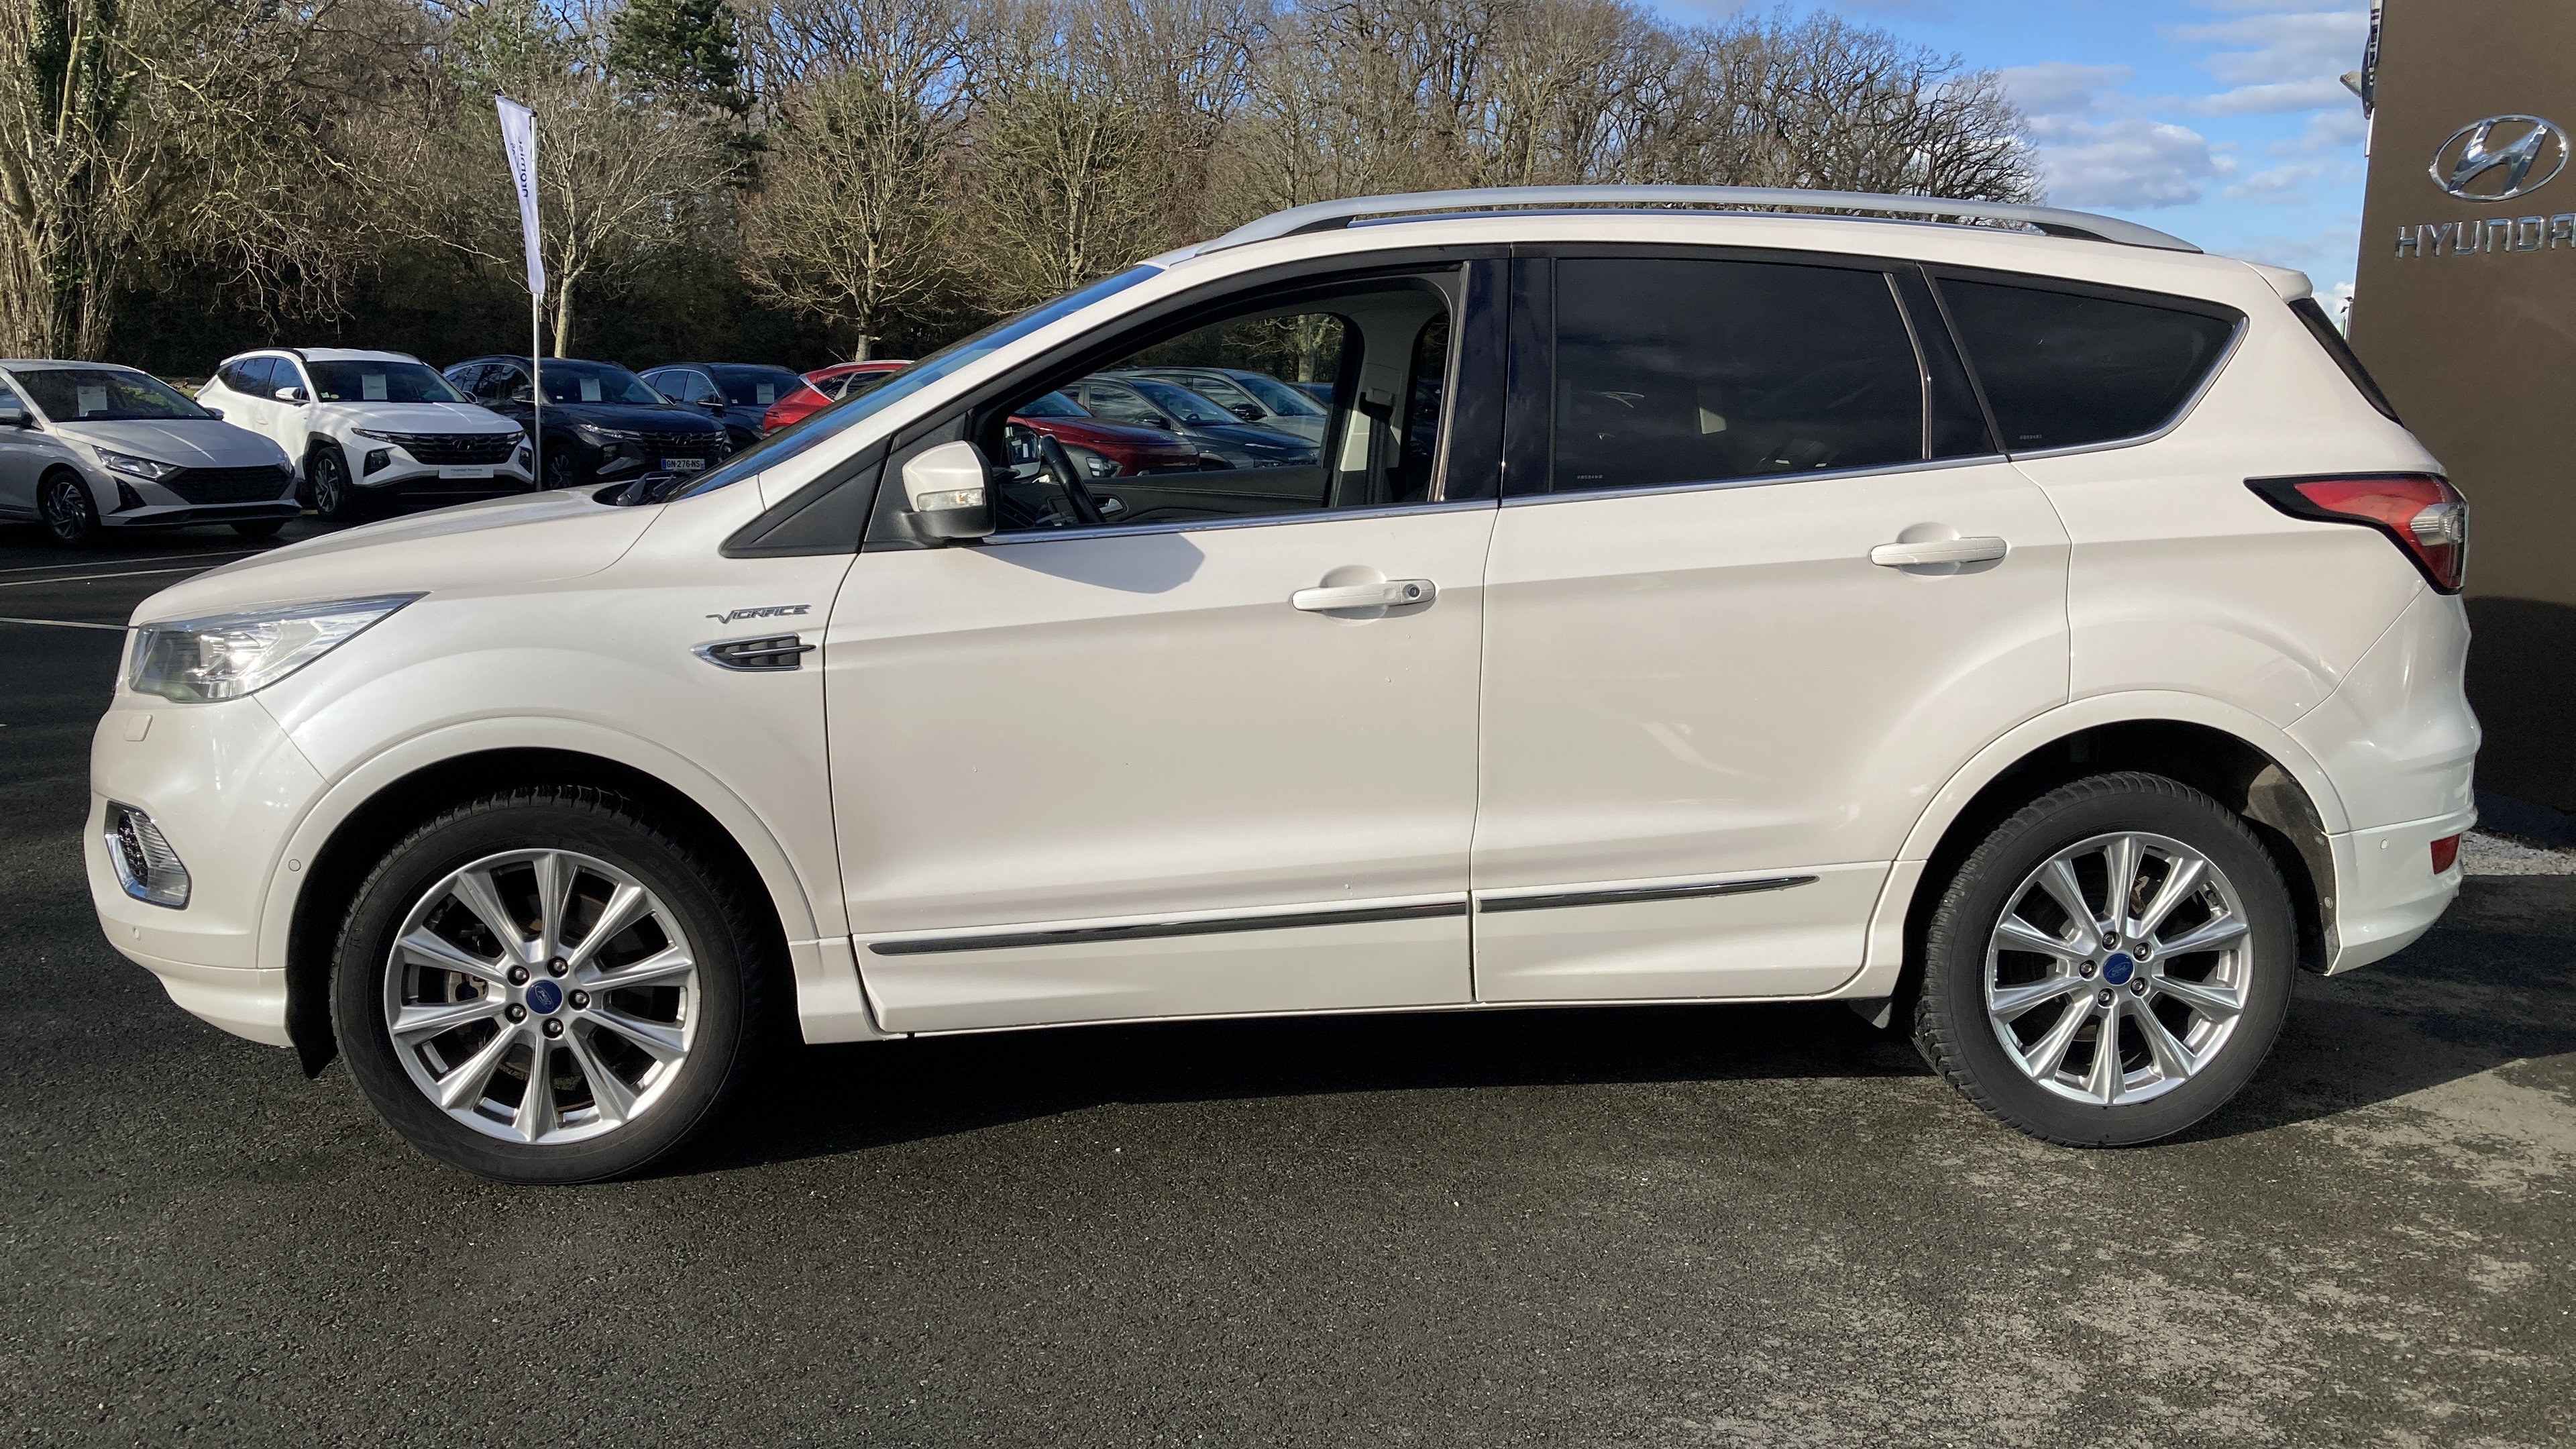 FORD Kuga Vignale 2.0 TDCi 180 S&S 4x4 Powershift  - Véhicule Occasion Océane Auto